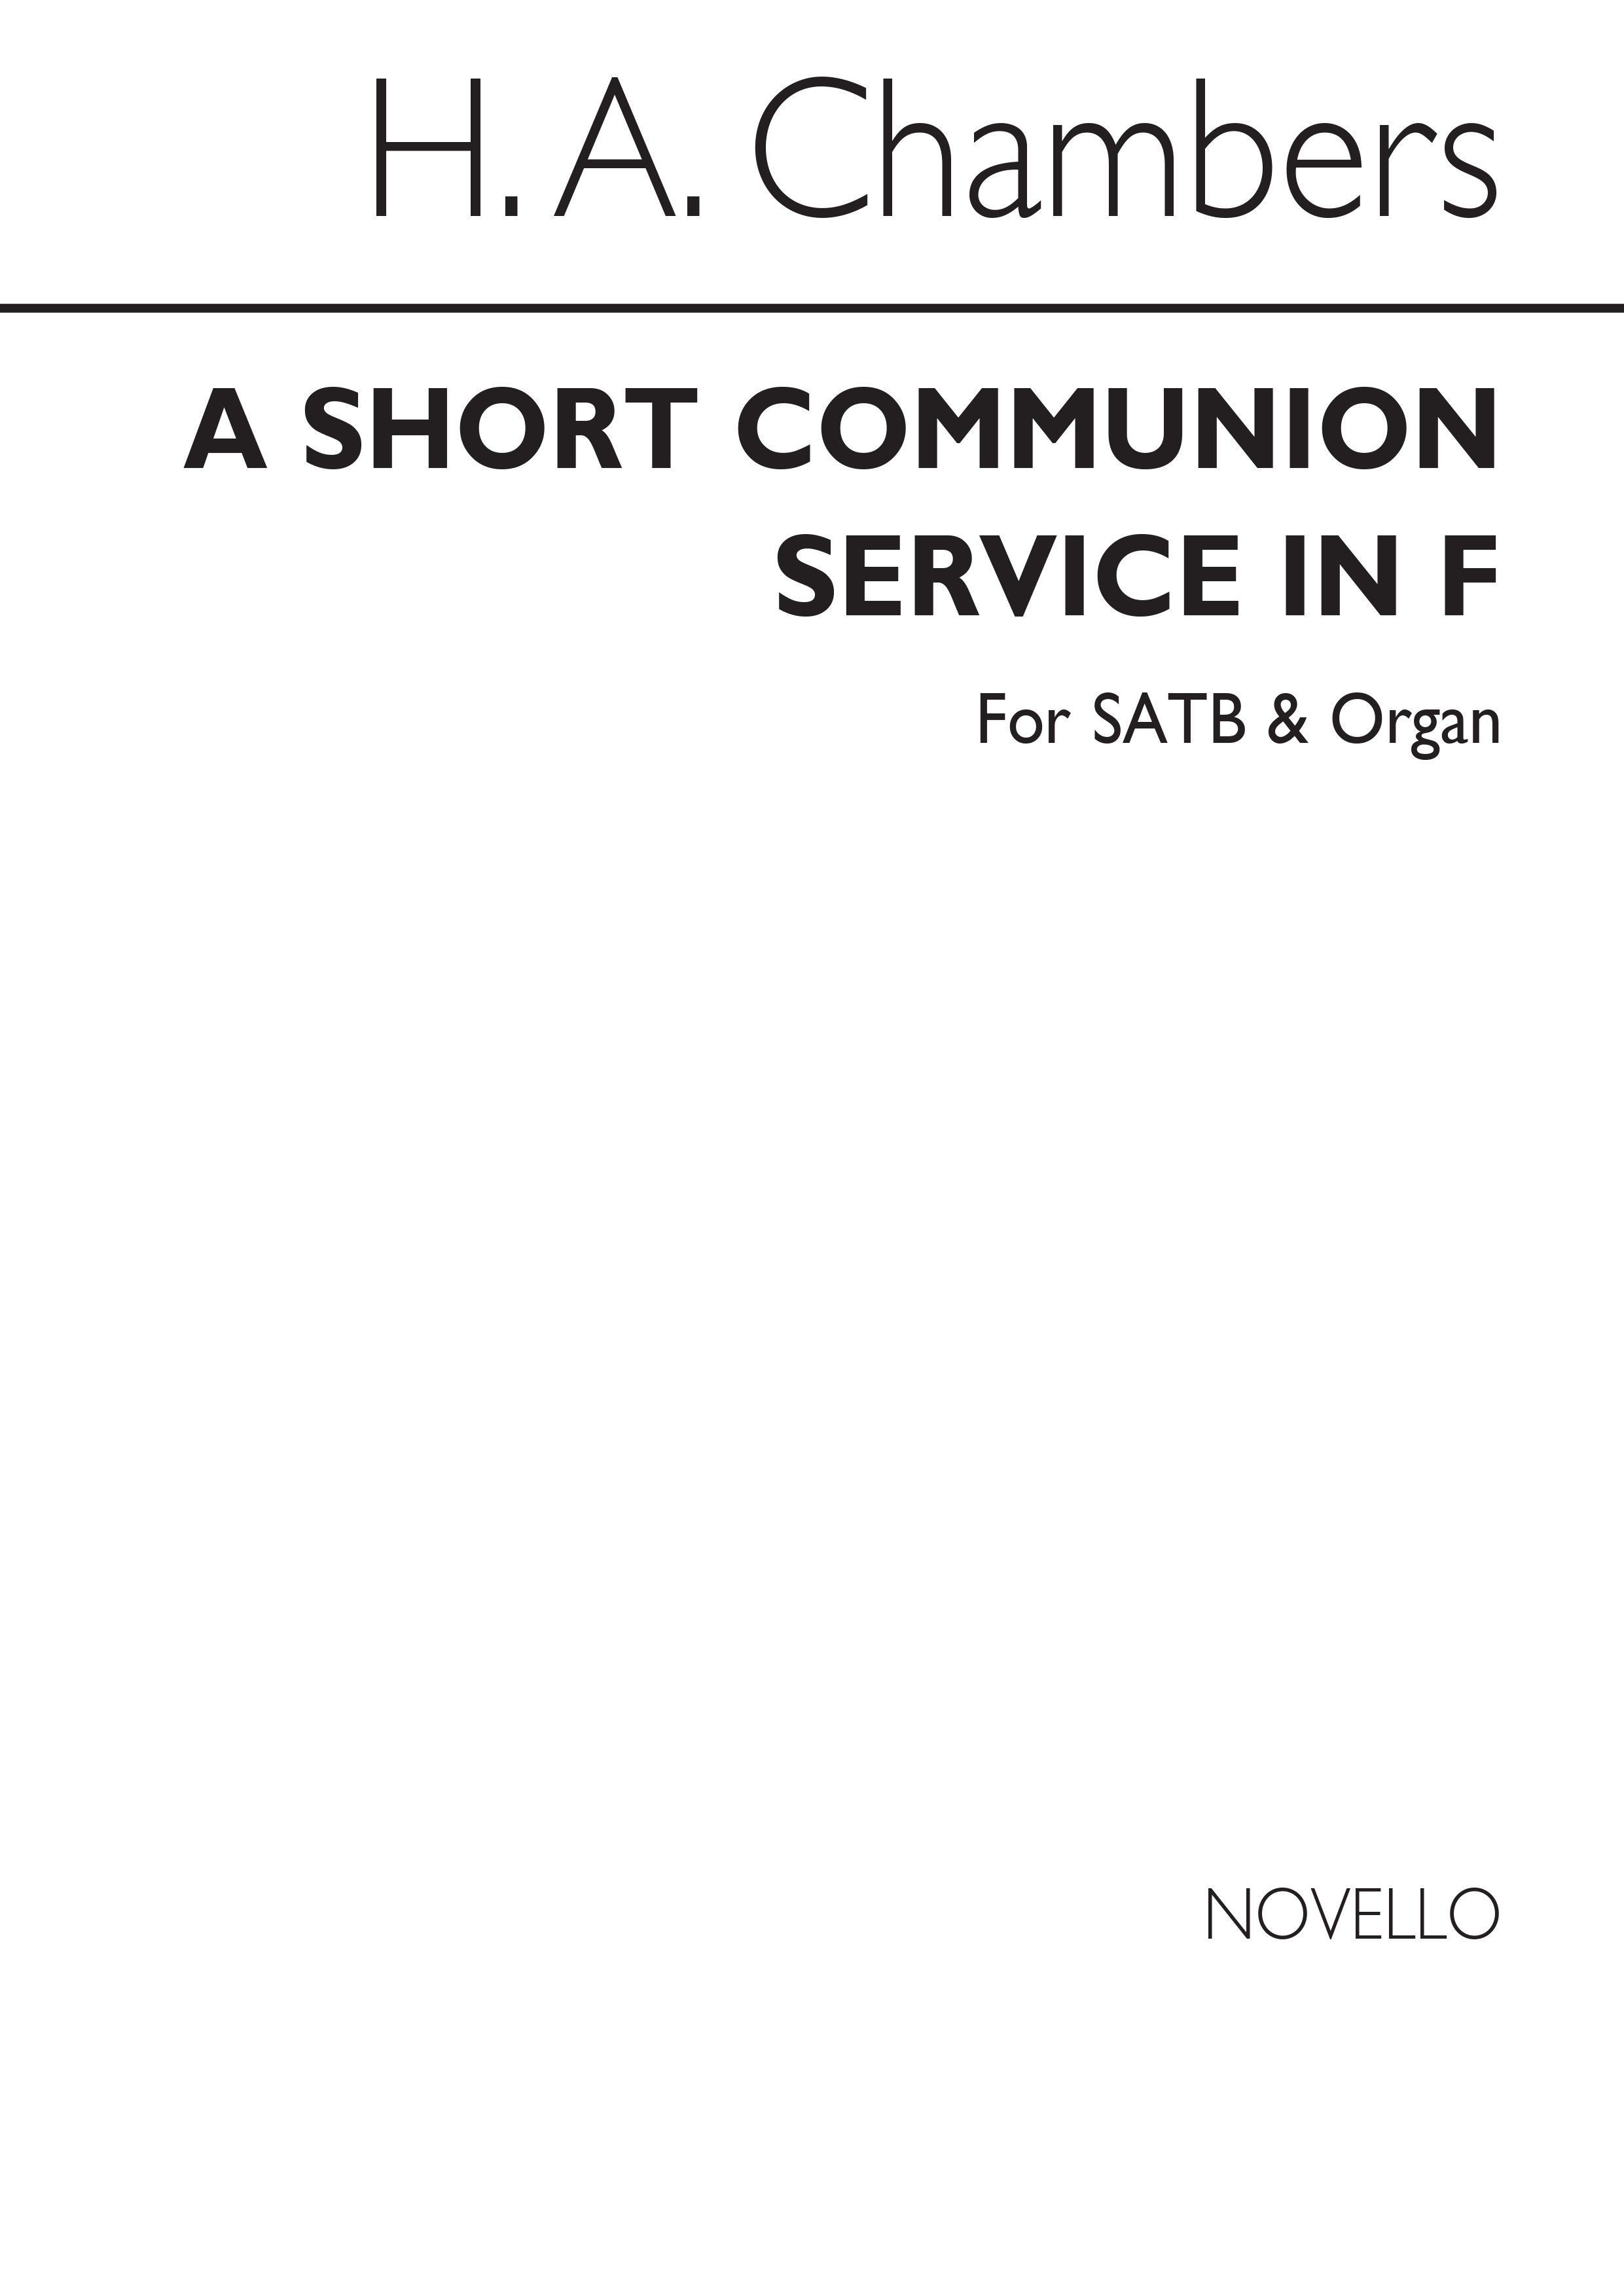 H.A. Chambers: A Short Communion Service In F Satb/Organ